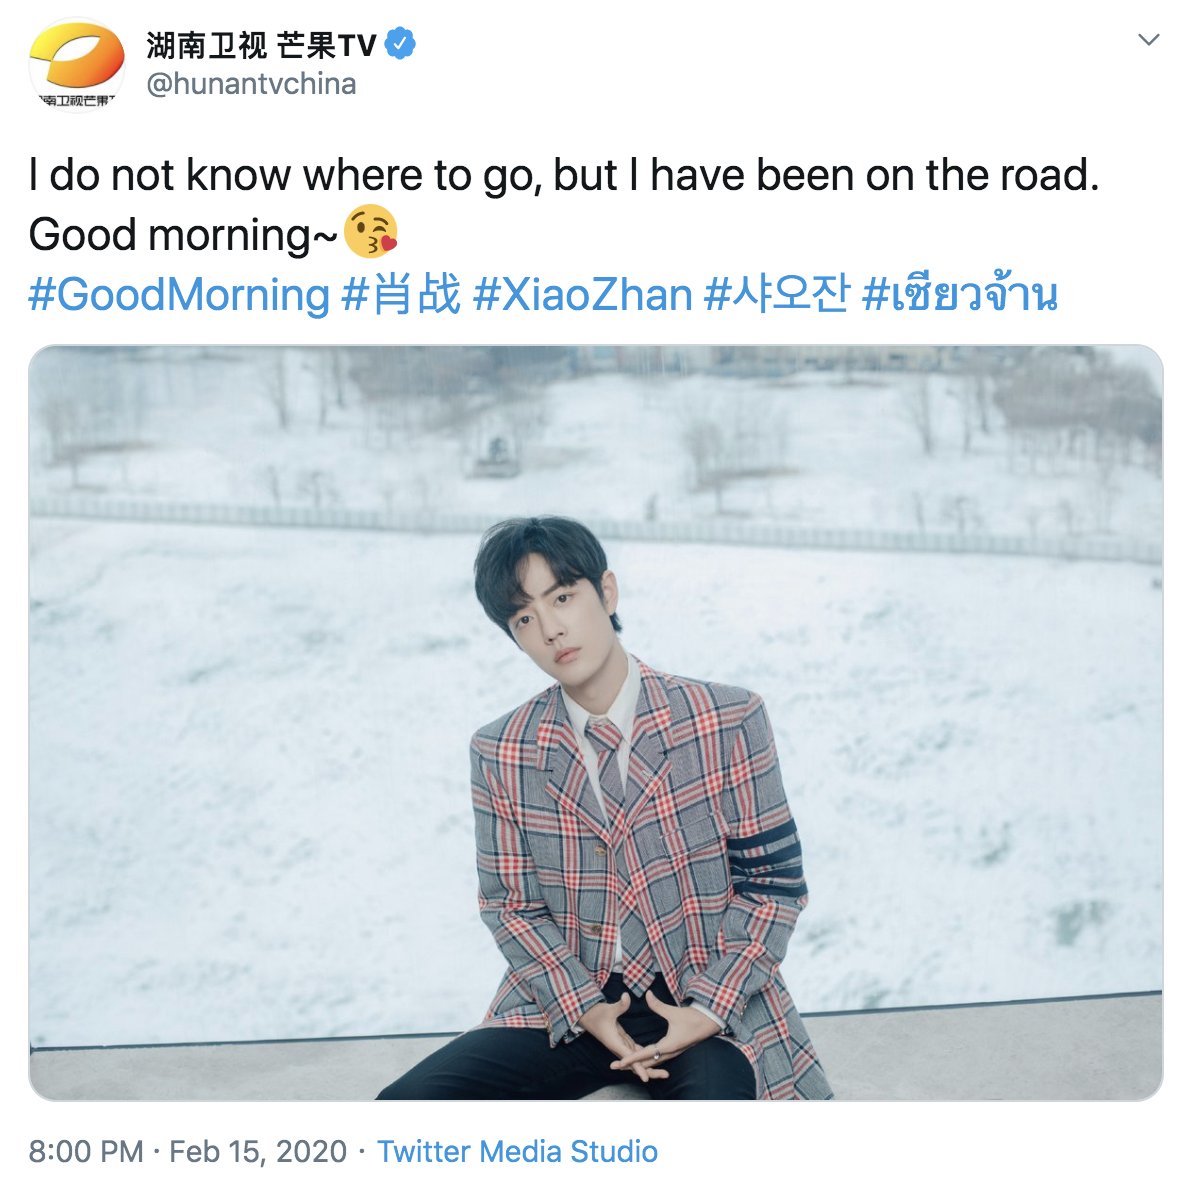 secondly, for a while at the end of january/beginning of february, when i was in the thick of writing, hunantv's twitter account kept fucking scooping my ideas ( @bonbonruru can attest to how much i whined at her about this)